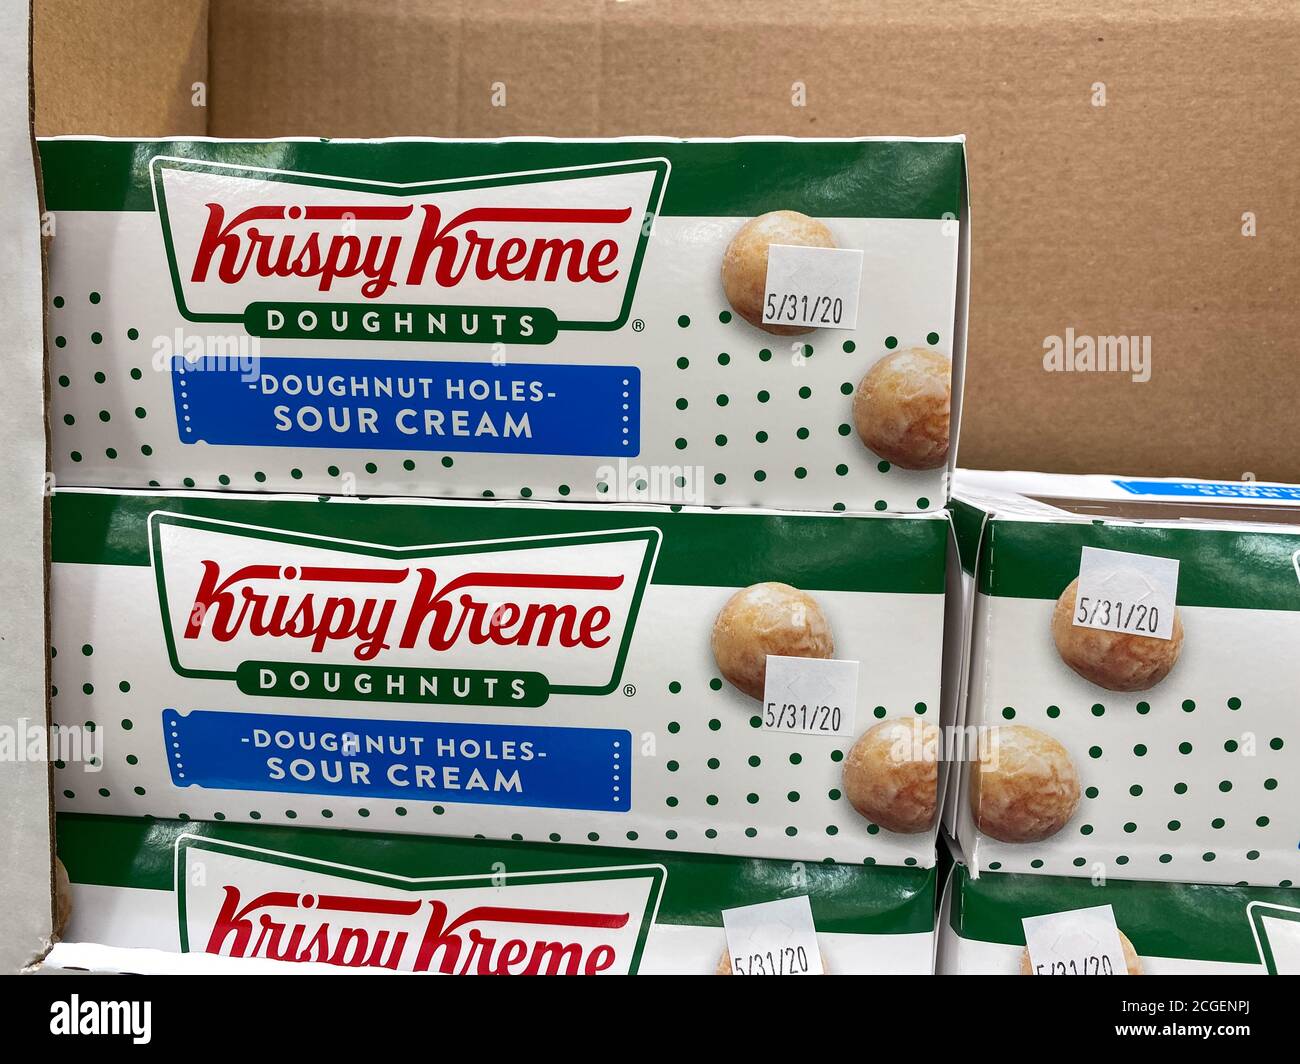 Orlando,FL/USA -5/15/20:  A stack of boxes of Krispy Kreme Doughnut Holes at a Sams Club grocery store ready to be purchased by consumers. Stock Photo